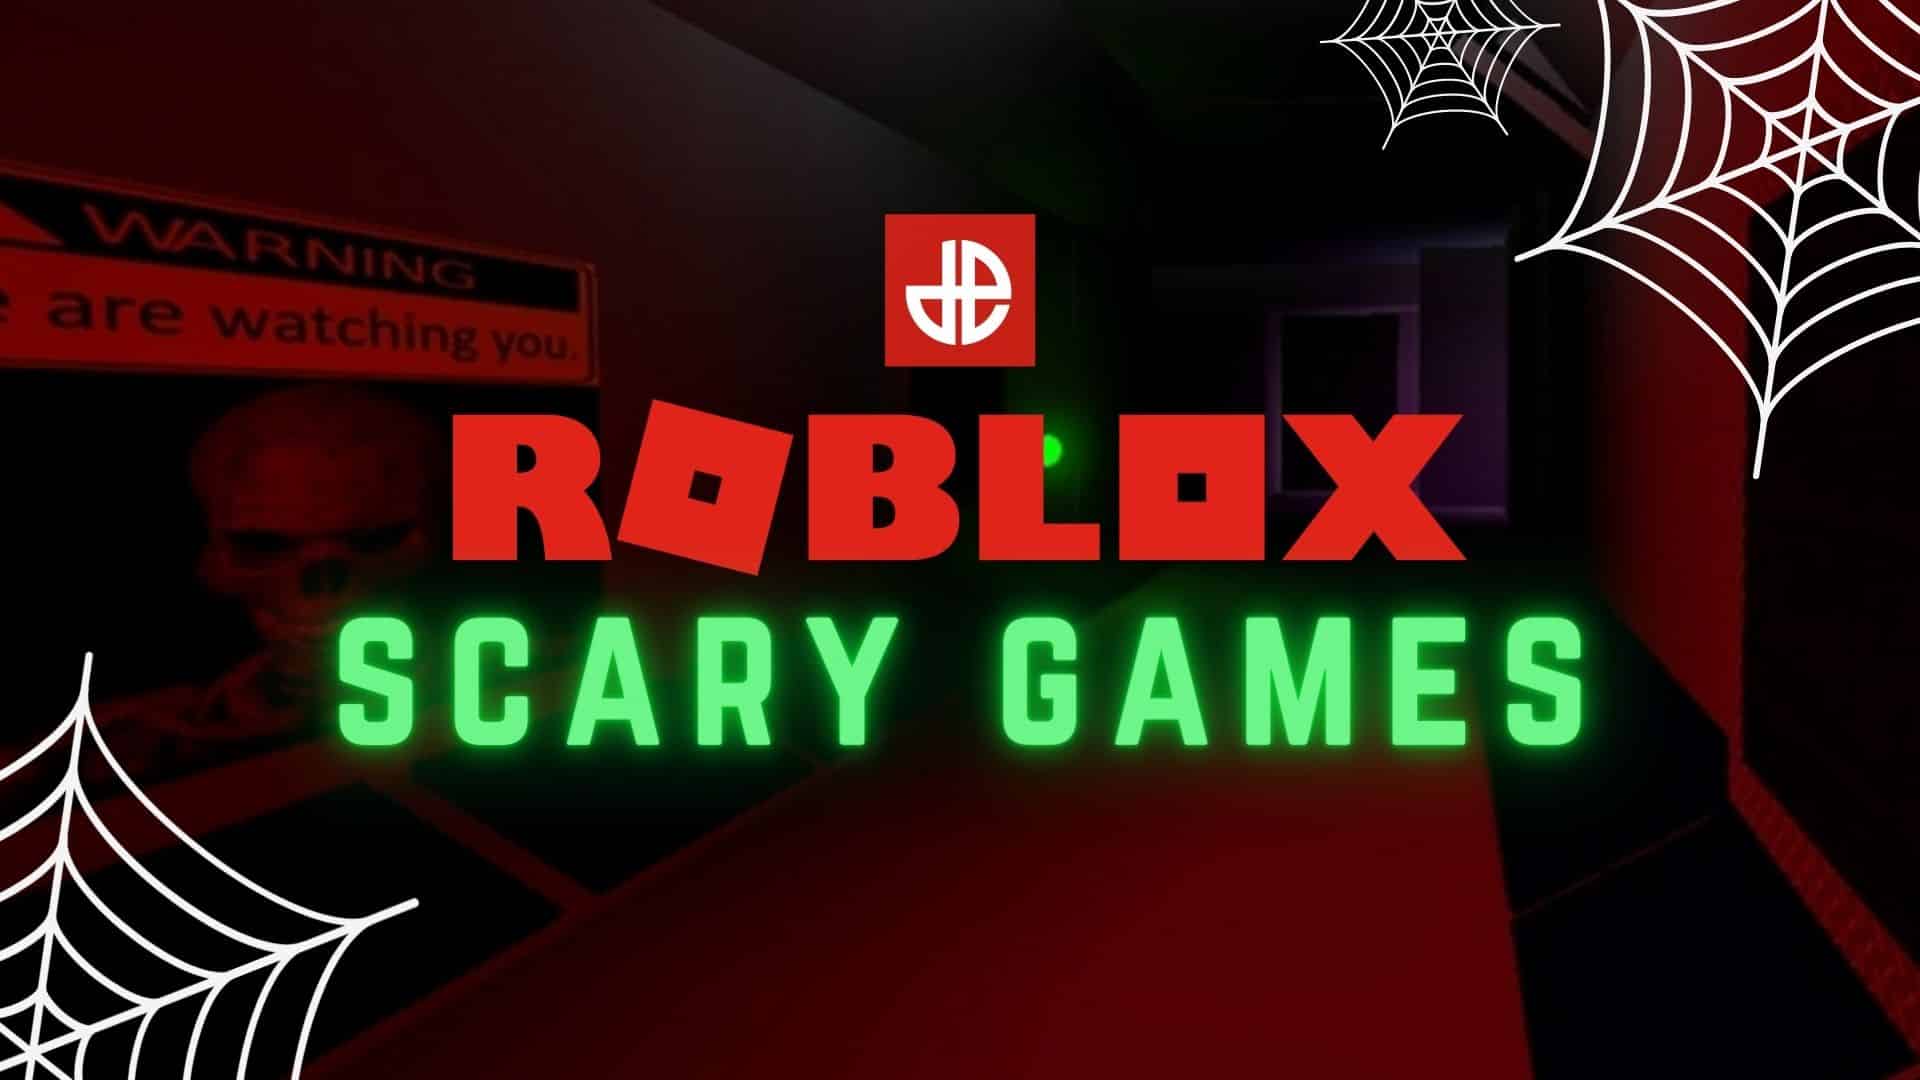 Roblox finally allows “swearing” and players are delighted - Dexerto